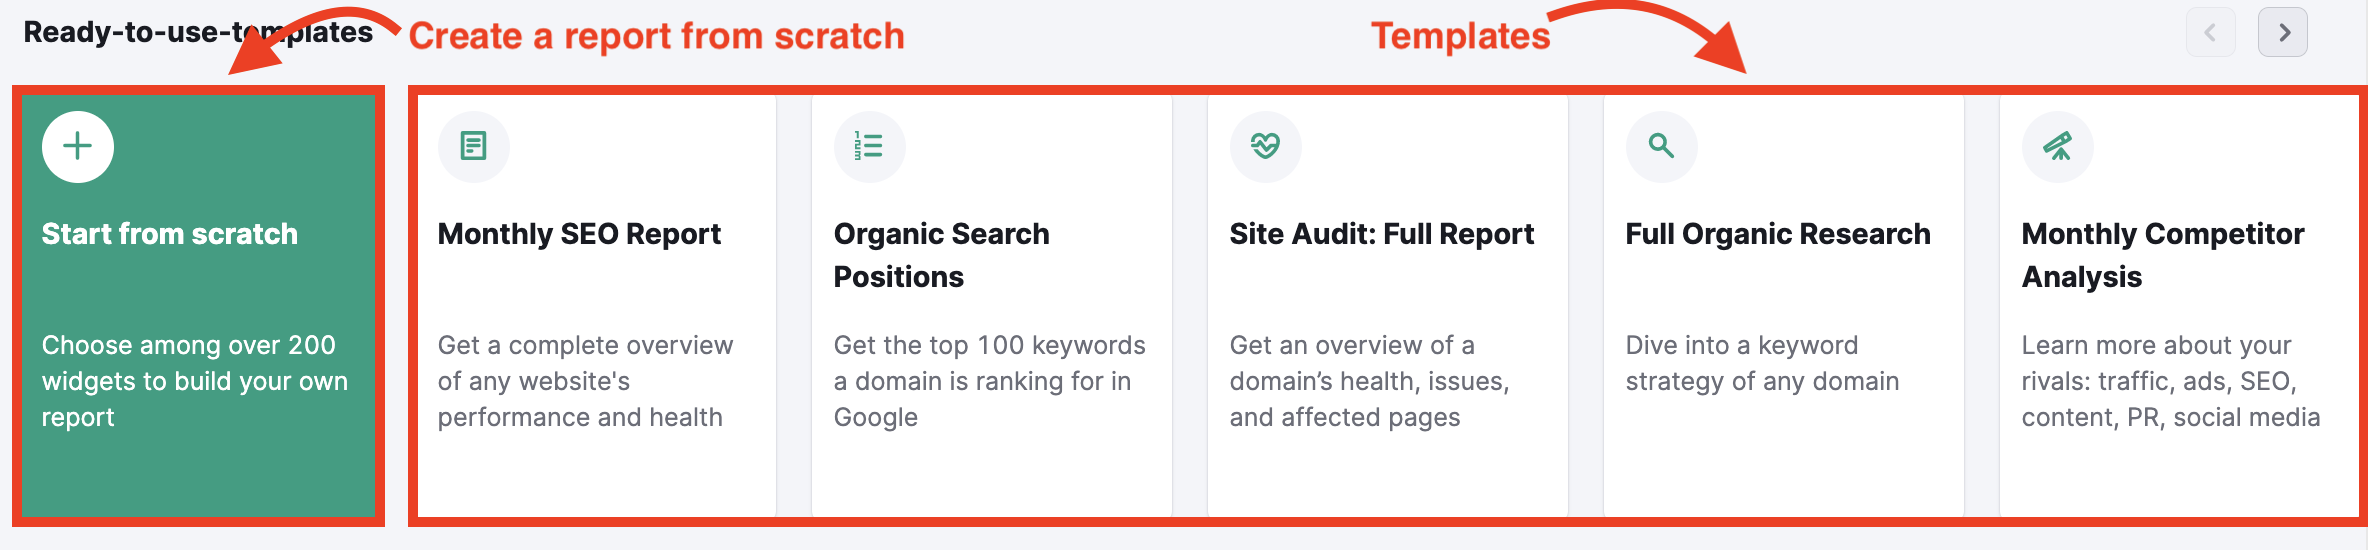 Building a Pitch in Semrush image 1